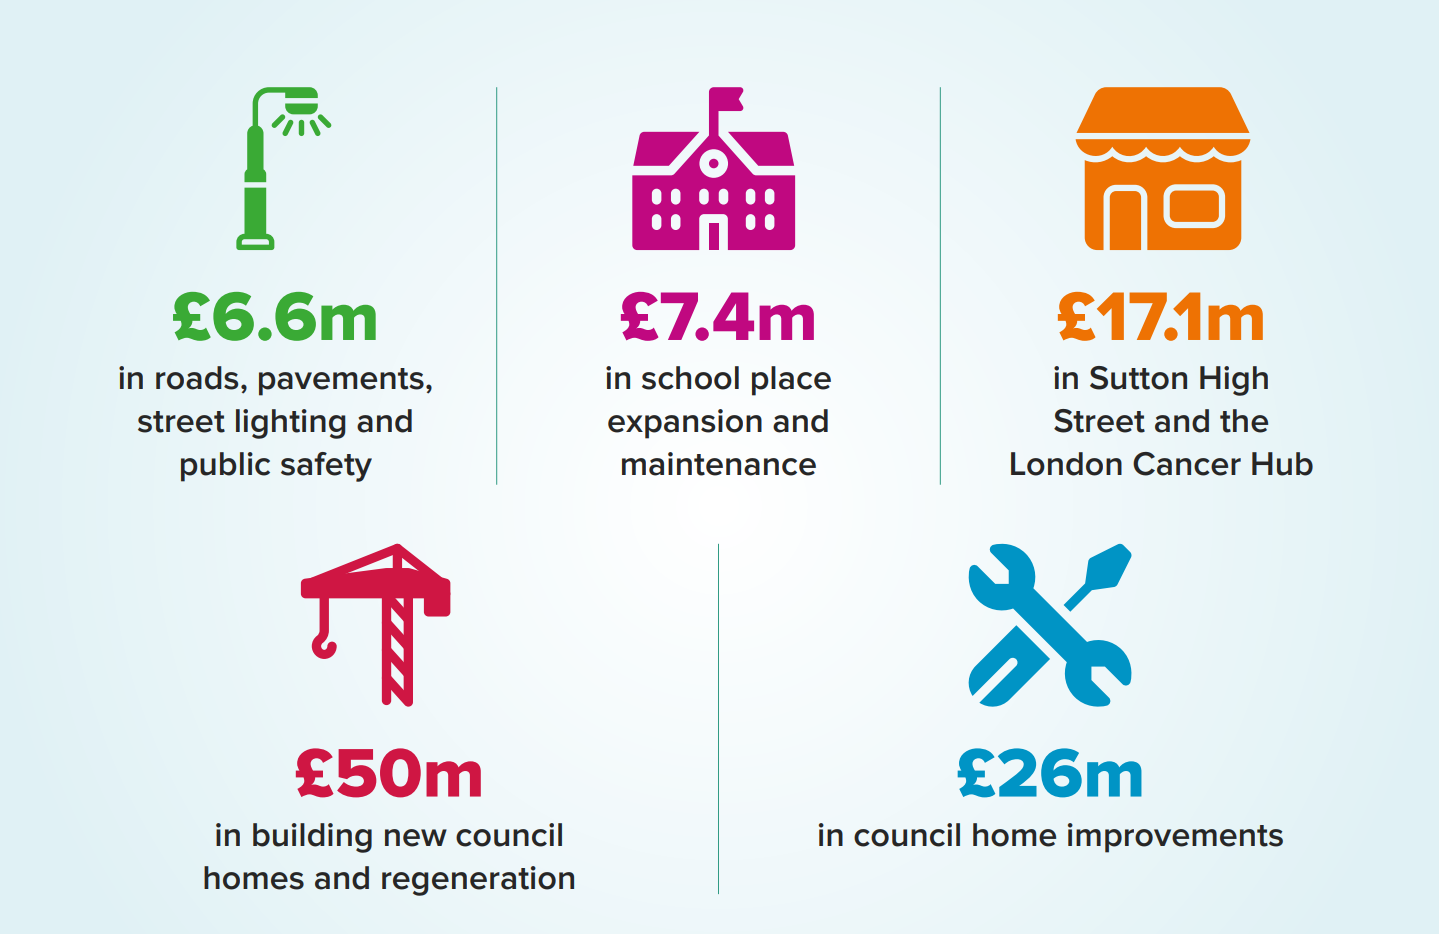 We invest £6.6 million in roads, pavements, street lighting and public safety, £7.4 million in school place expansion and maintenance, £17.1 million in Sutton High Street and the London cancer hub, £50 million in building new Council homes and regeneration and £26 million in Council homes improvements.